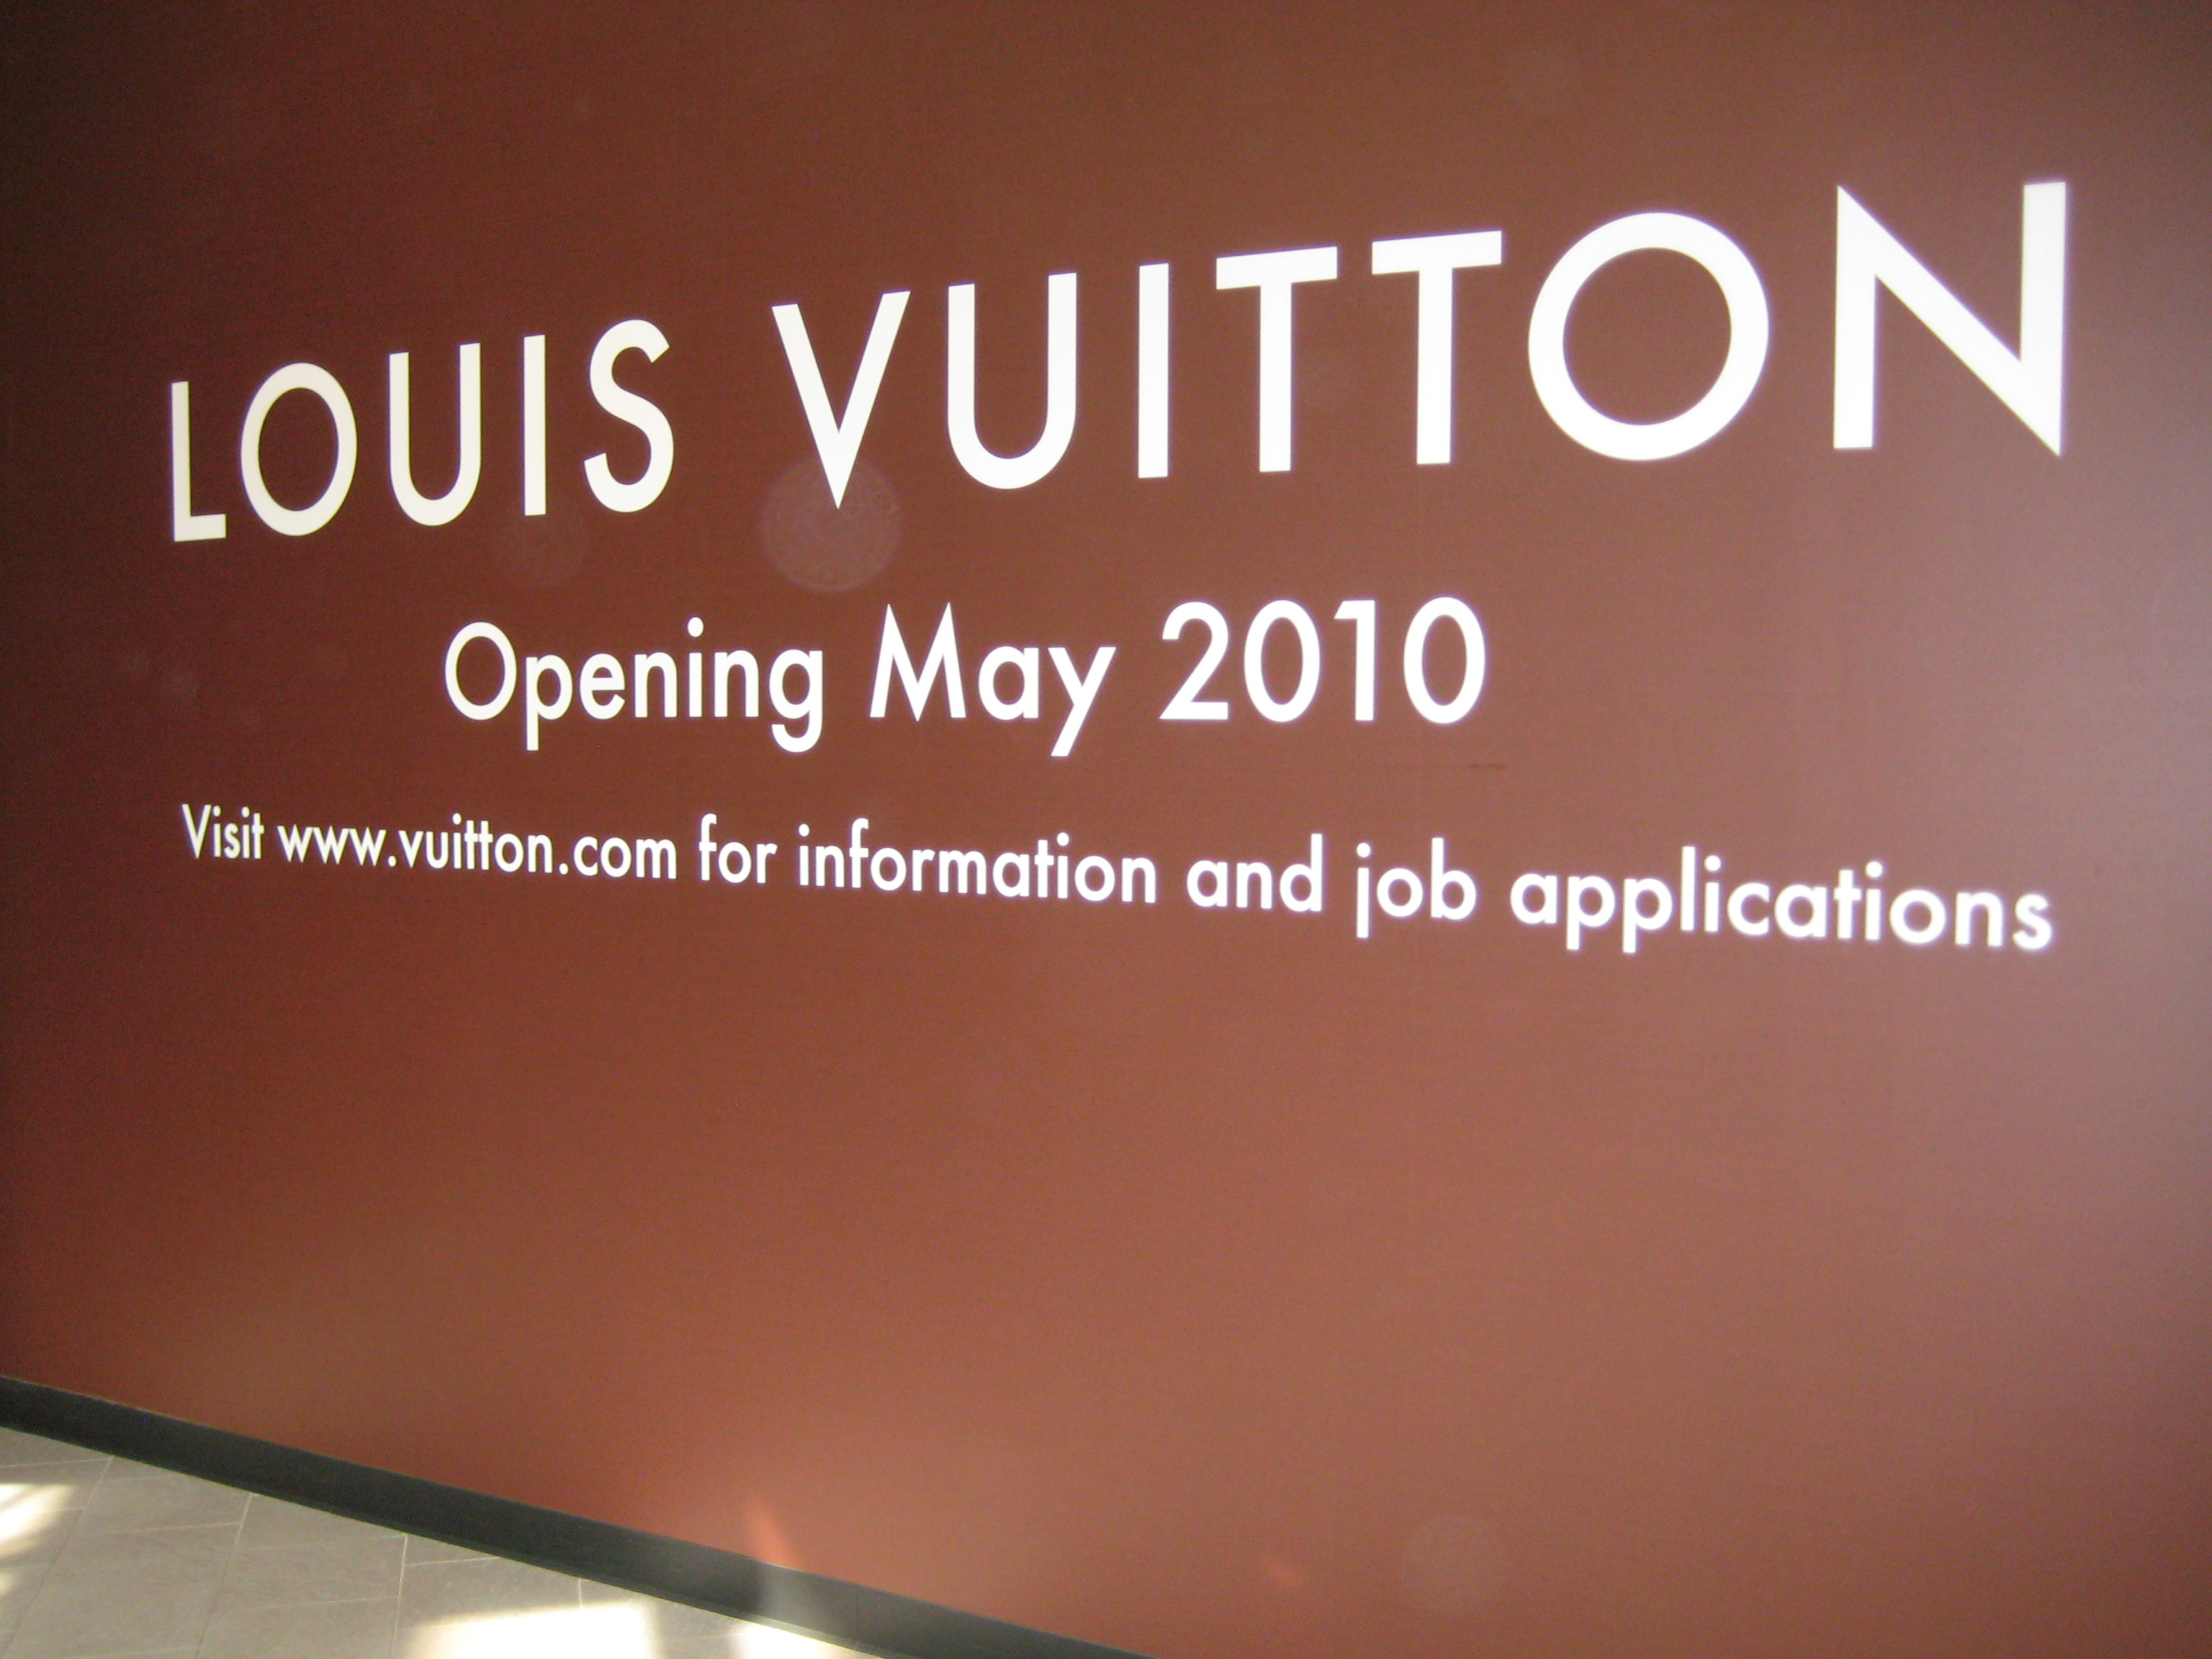 Louis Vuitton Opening in Galleria May 4 at 10 am!!